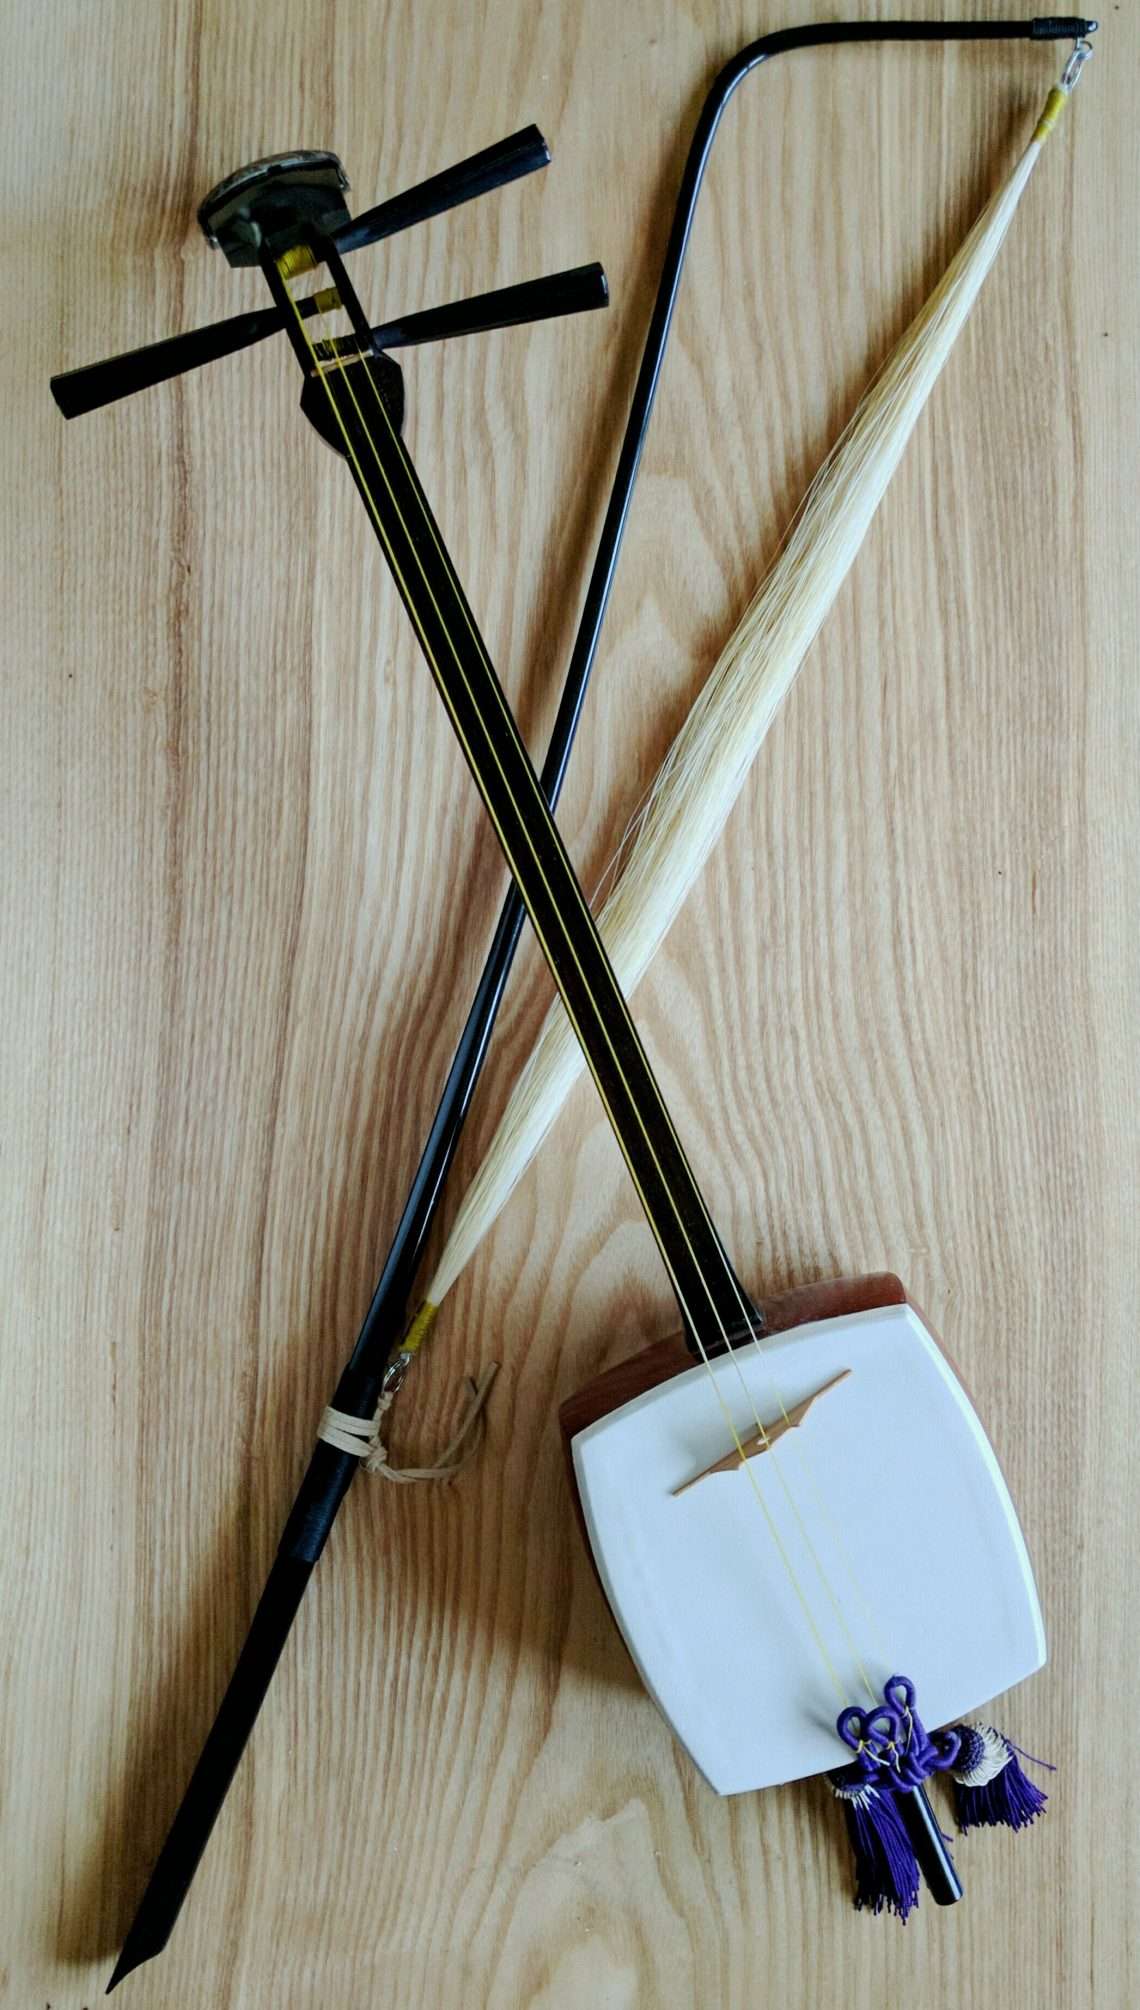 Kokyu: instrument composition, history, use, playing technique